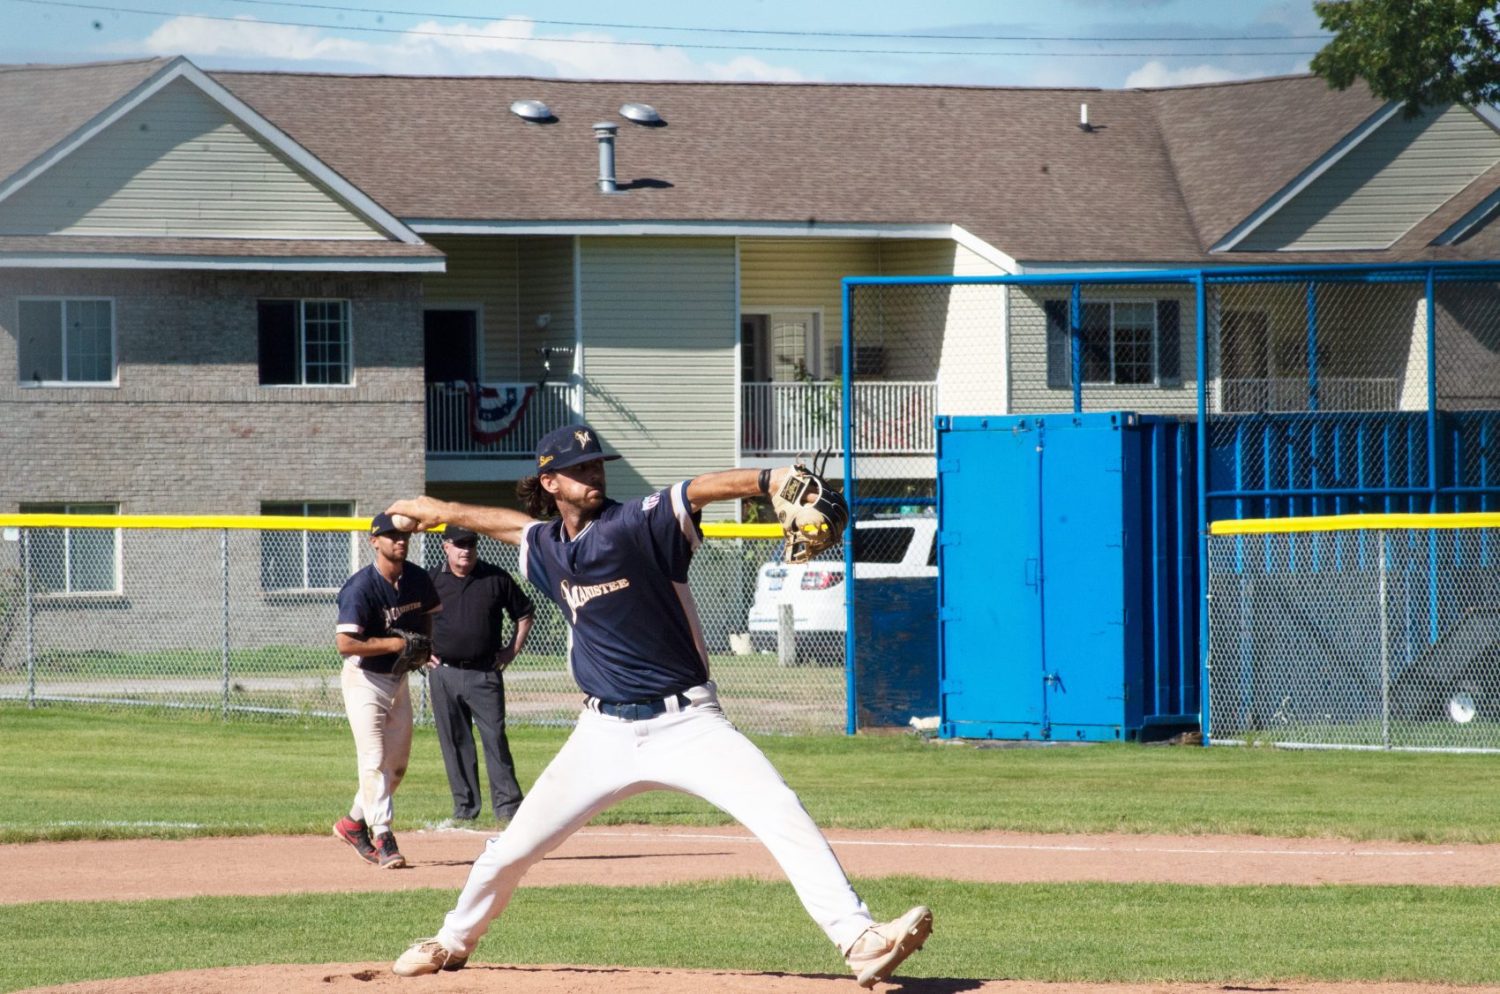 Manistee Saints split two games on Friday, advance in National Amateur Baseball Federation regional action